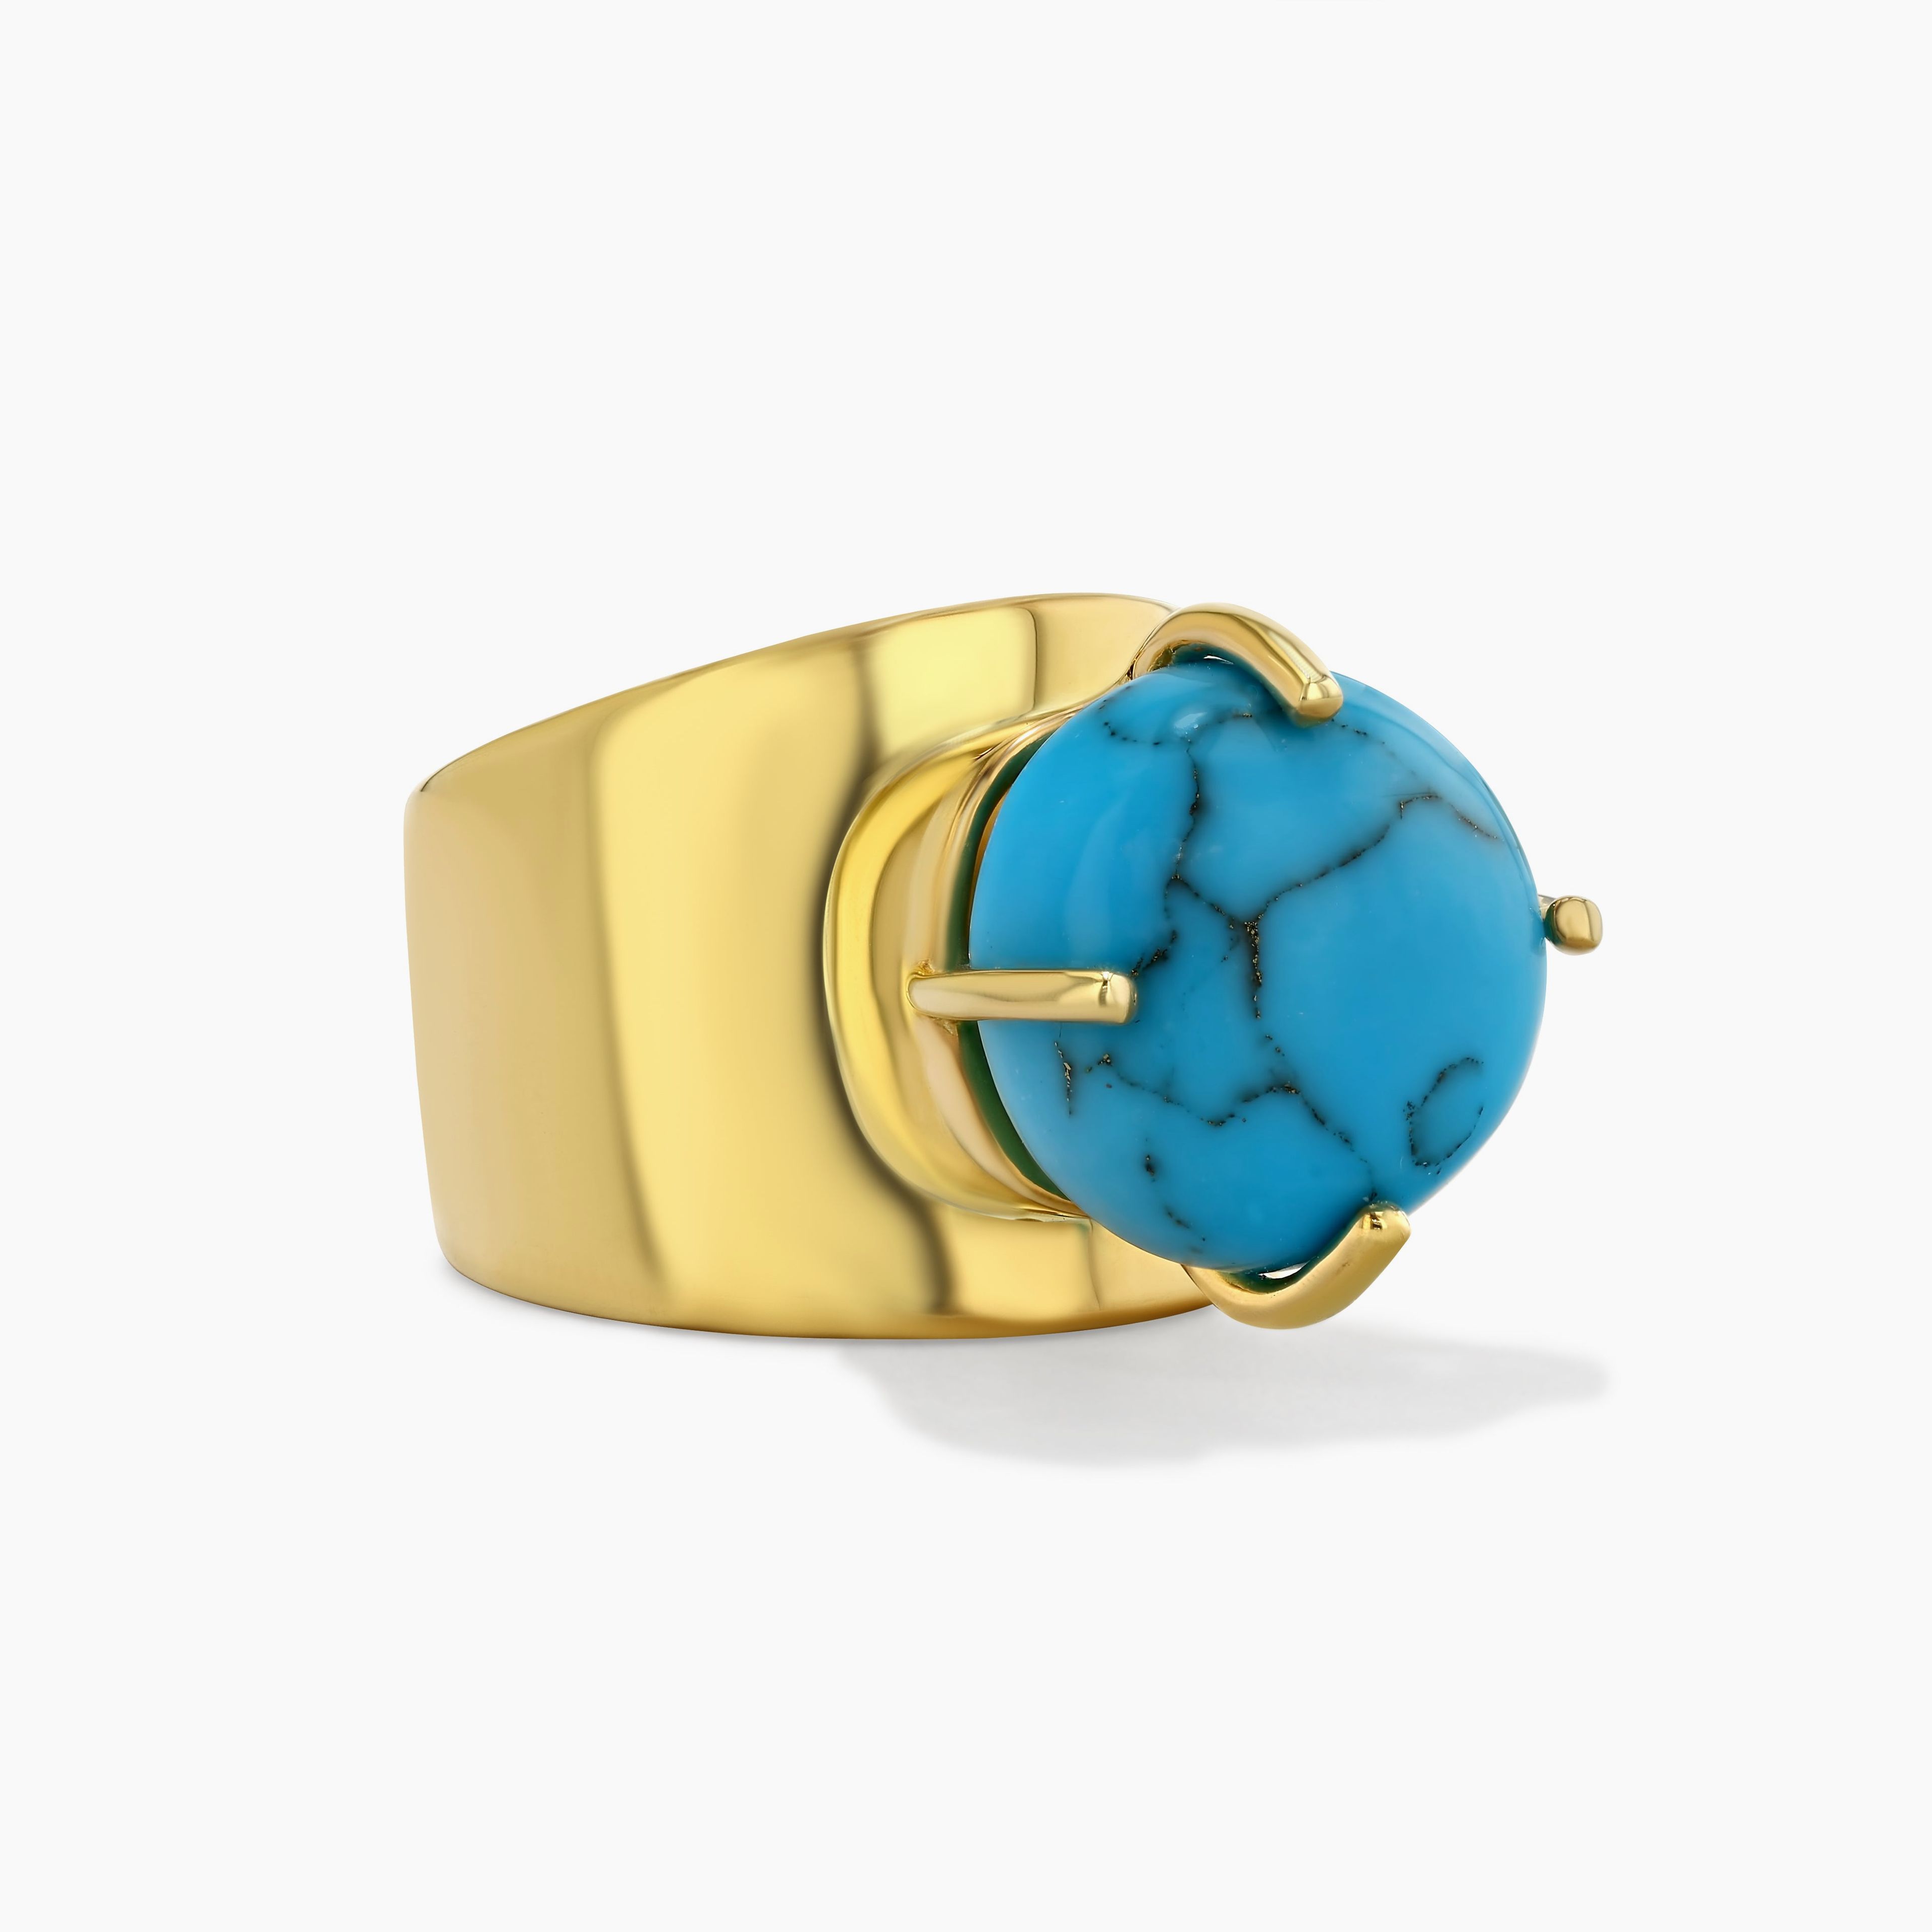 Allure Lilly Ring with Round Cut Turquoise - Size 6 left